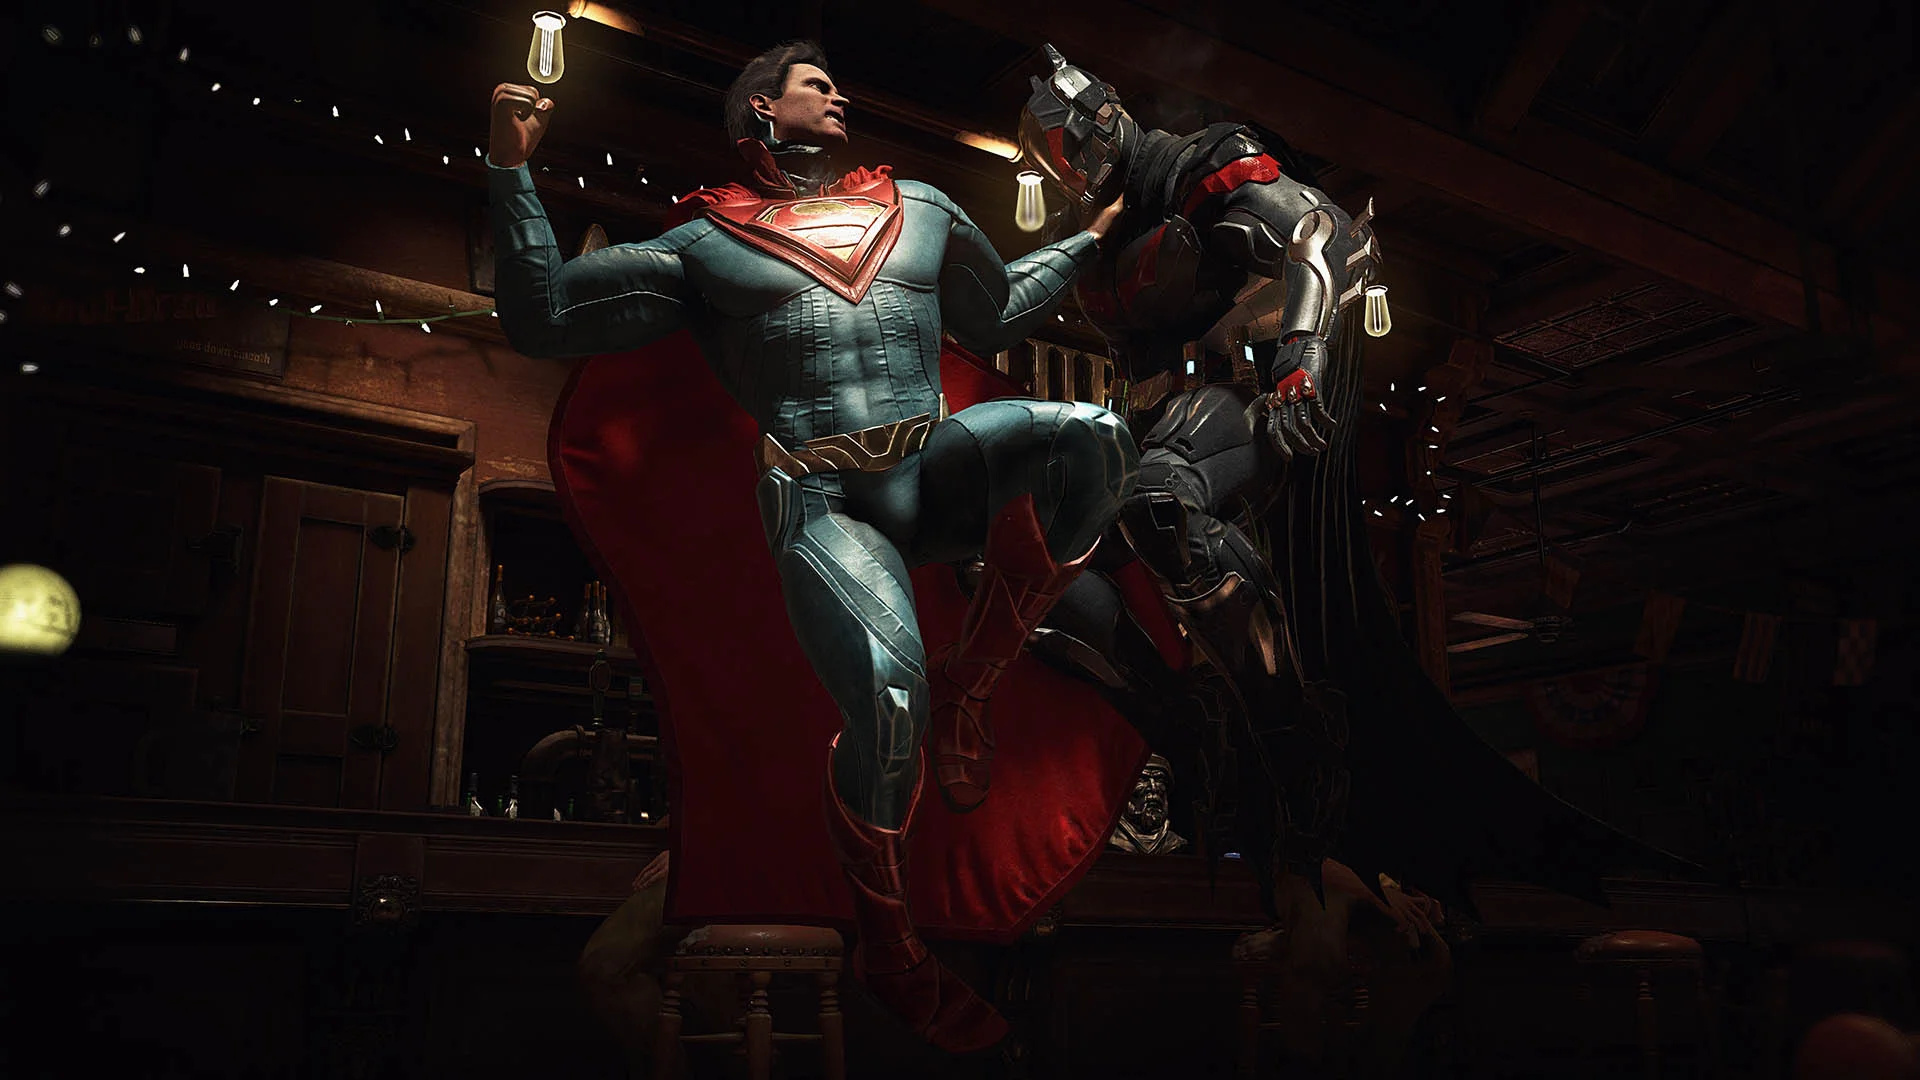 Injustice 2 Gaming, Command moves, Heroes guide, PS4 and Xbox, 1920x1080 Full HD Desktop